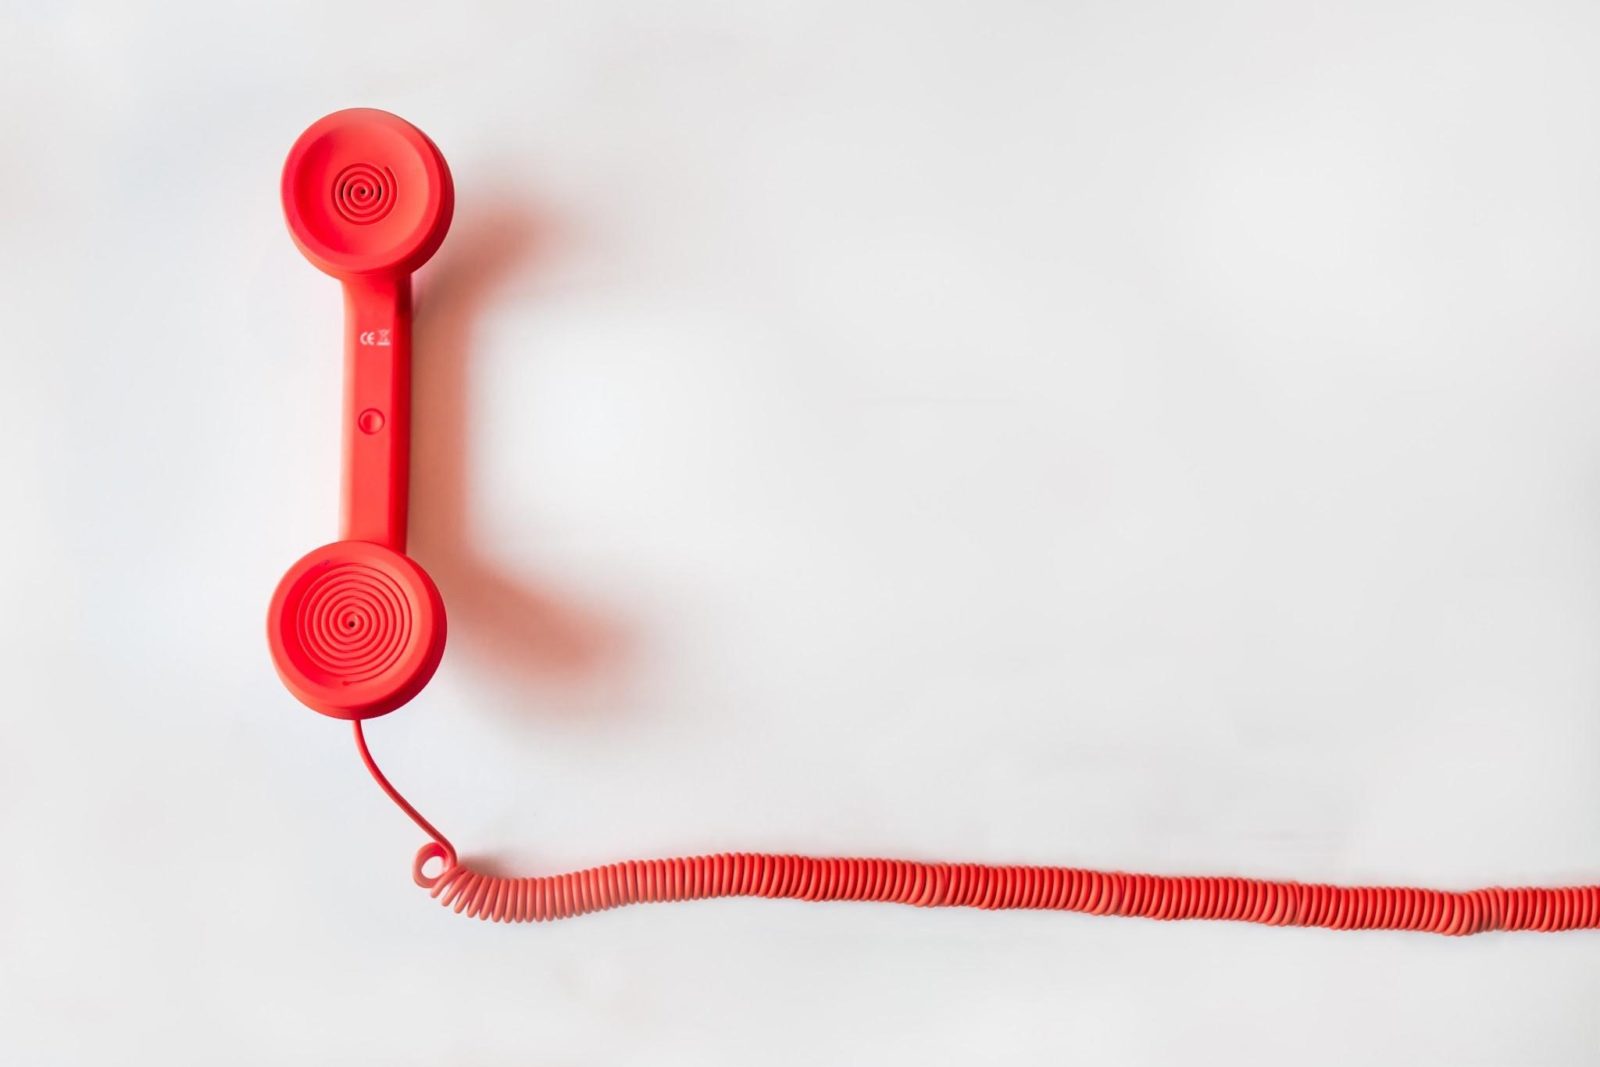 A picture of a red phone used for cold calling with a cord.